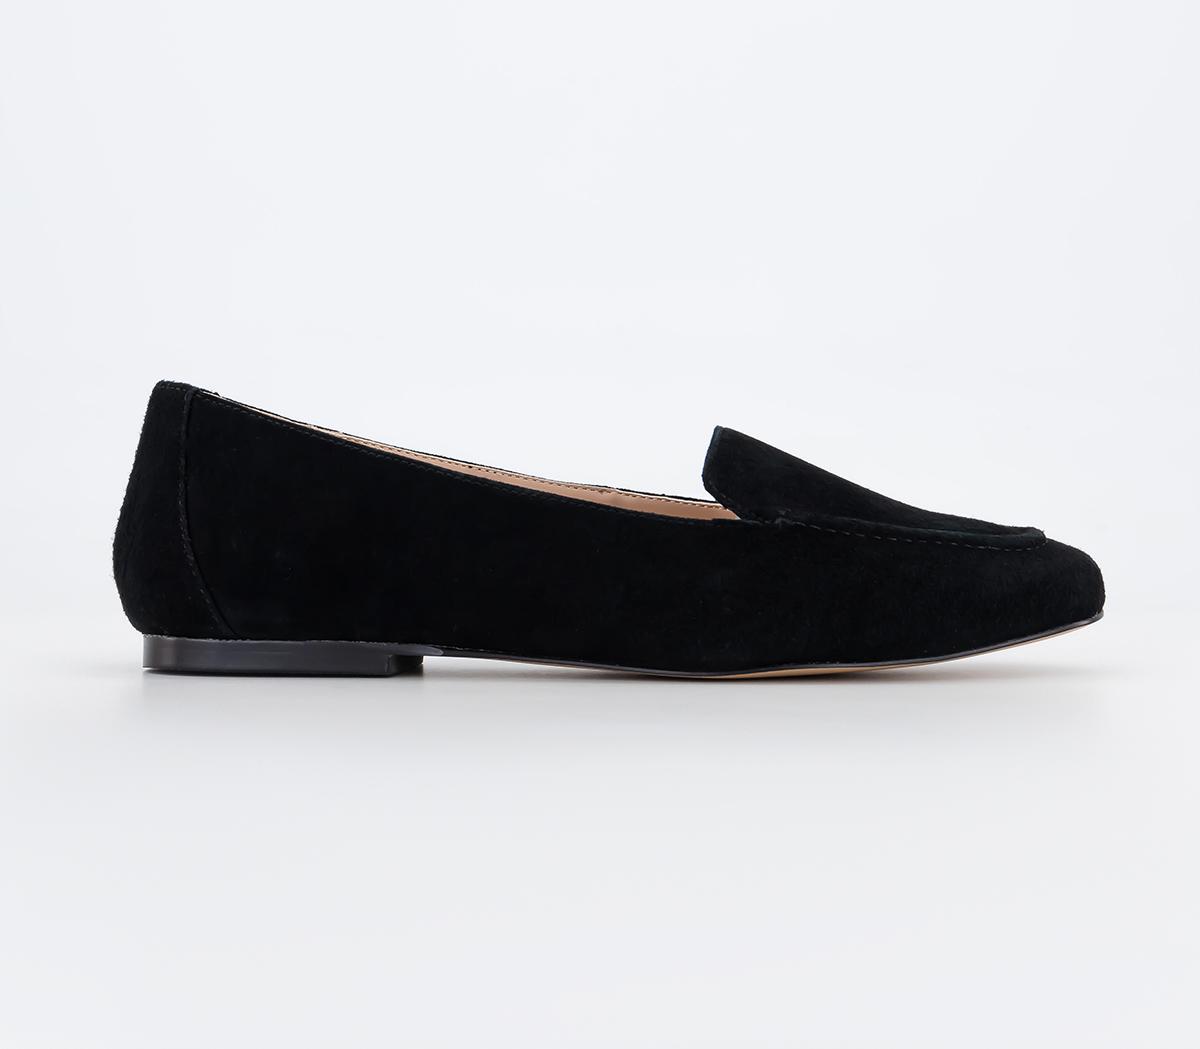 OFFICEWide Fit Flying Suede LoafersBlack Suede